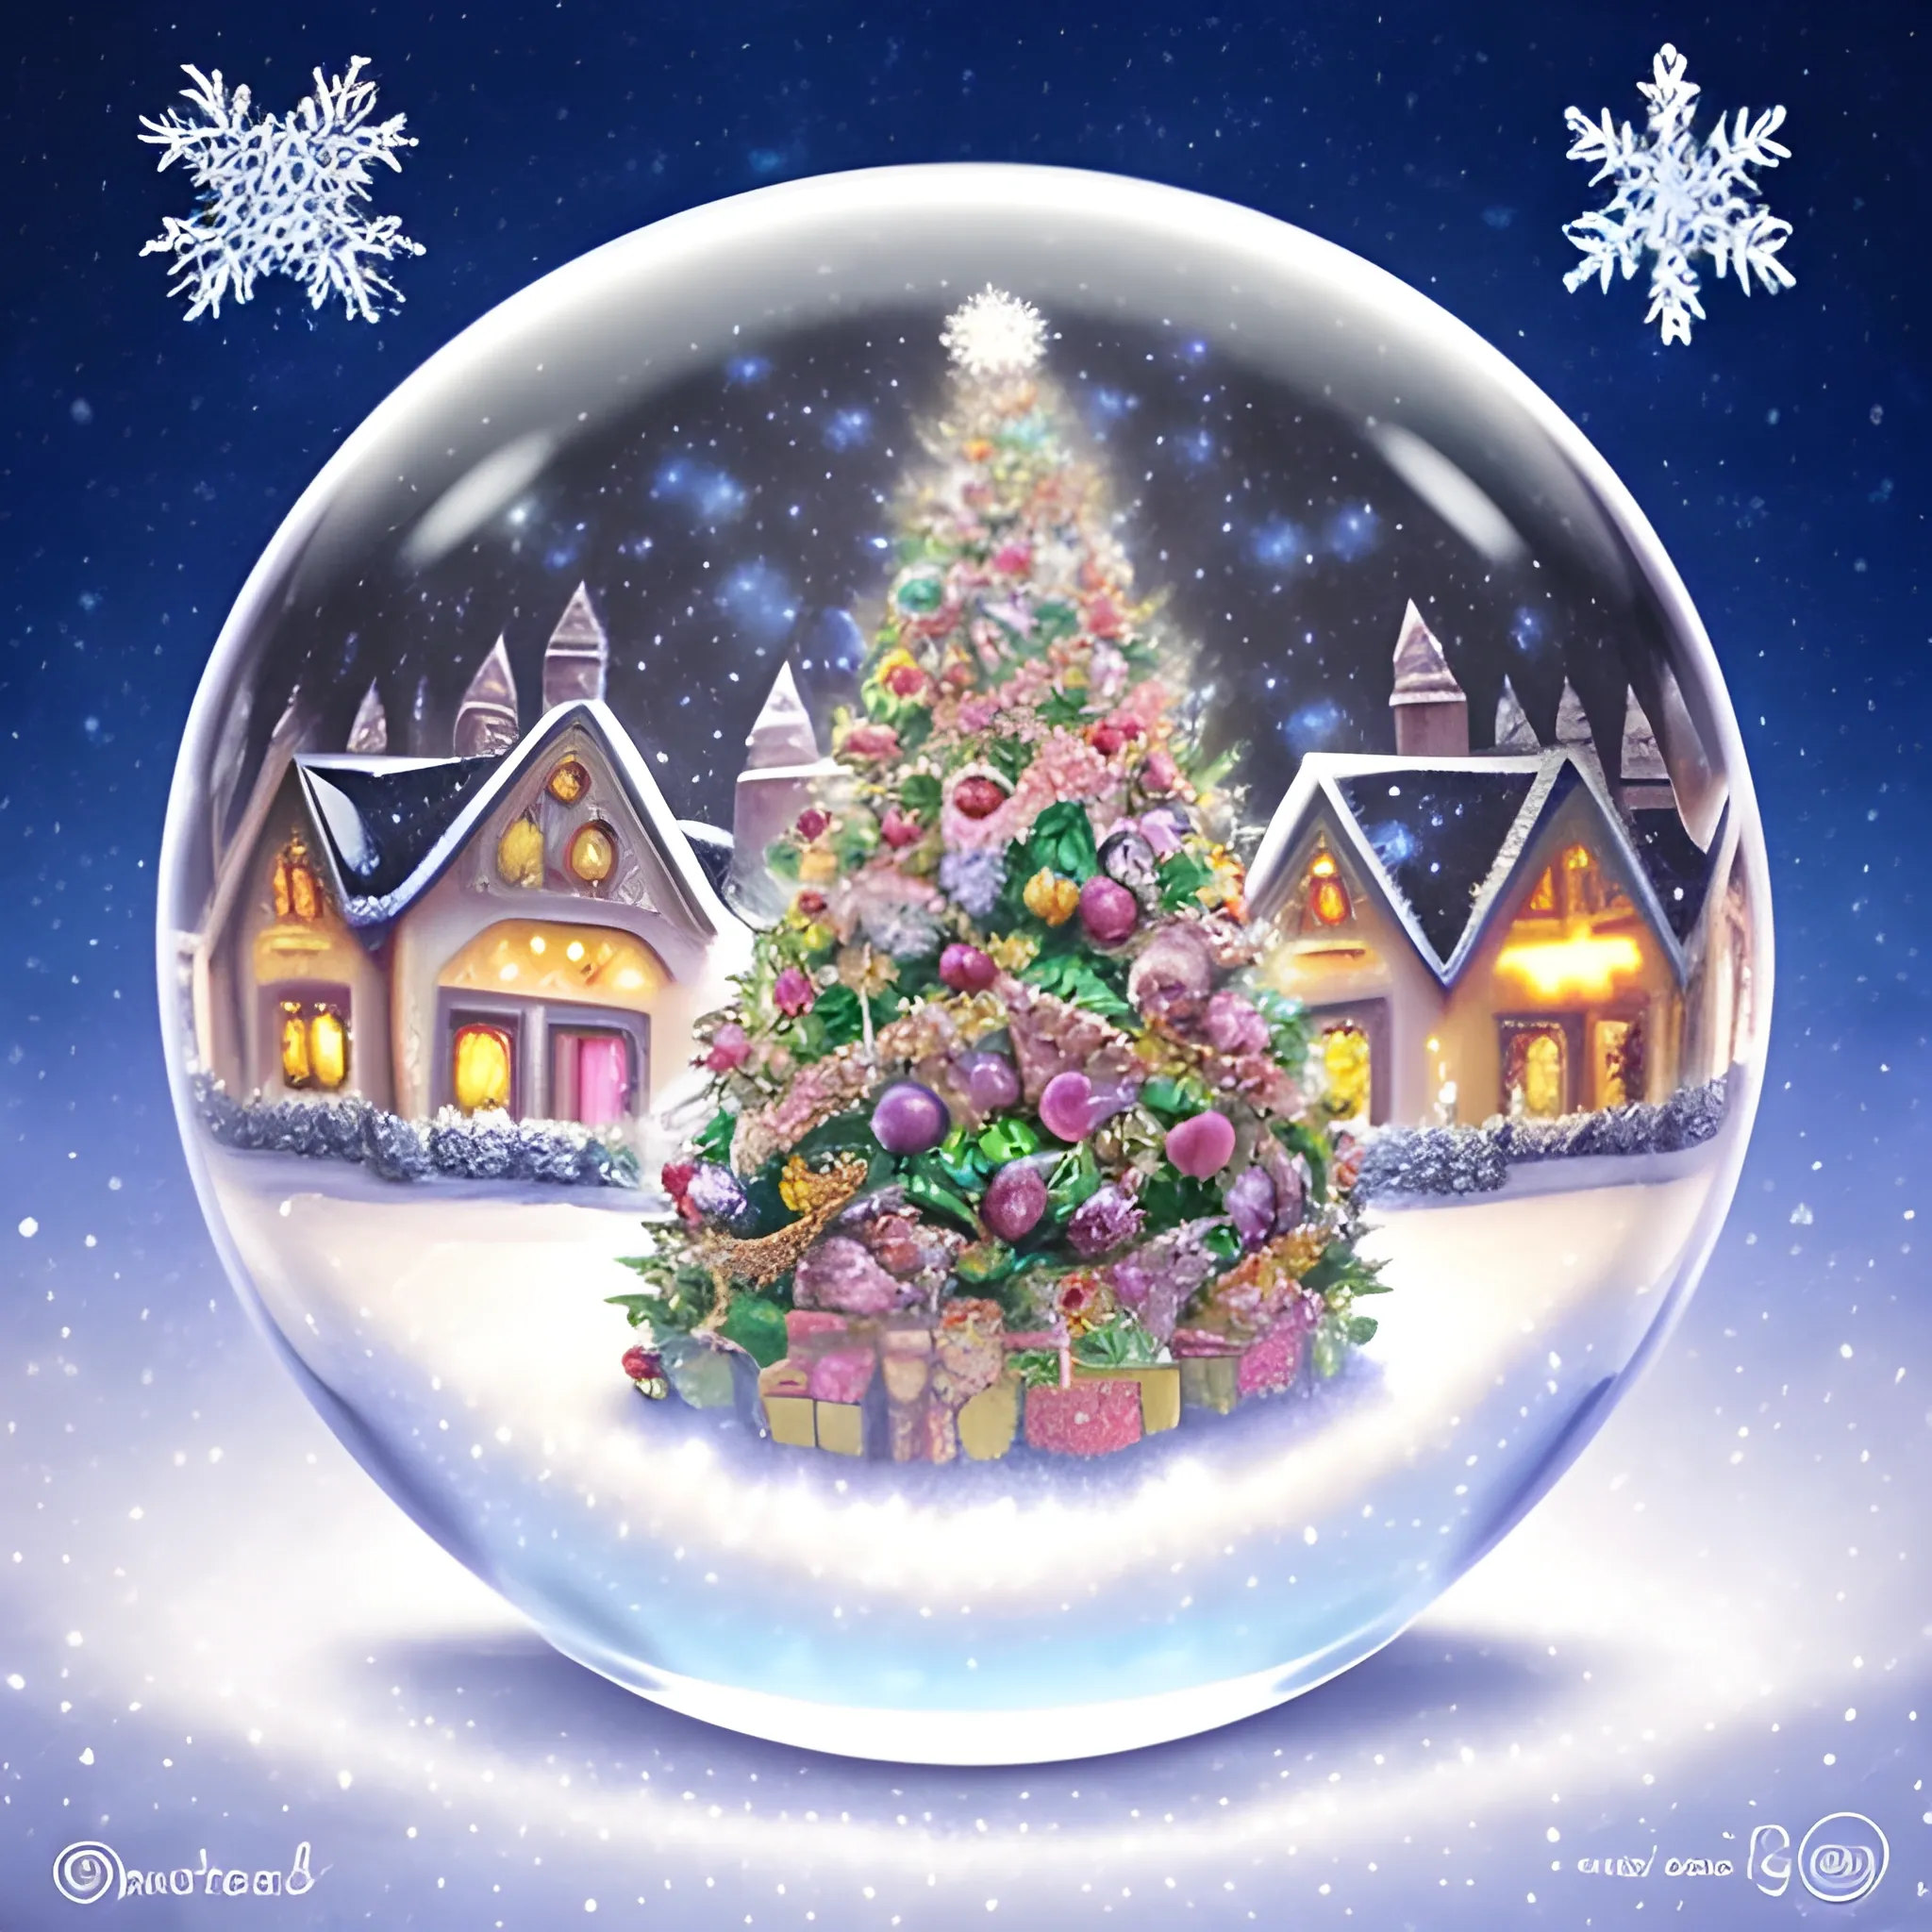 Imagine a magical Christmas crystal ball suspended in the air, adorned with festive details and surrounded by twinkling lights. Depict the scene reflected within the ball with iconic seasonal elements, such as a adorned Christmas tree, dancing snowflakes, and gleaming gifts. Use watercolors to capture the warmth of the festive lights and the enchantment emanating from this magical sphere. Let your creativity soar and bring this magical Christmas moment to life in your artwork